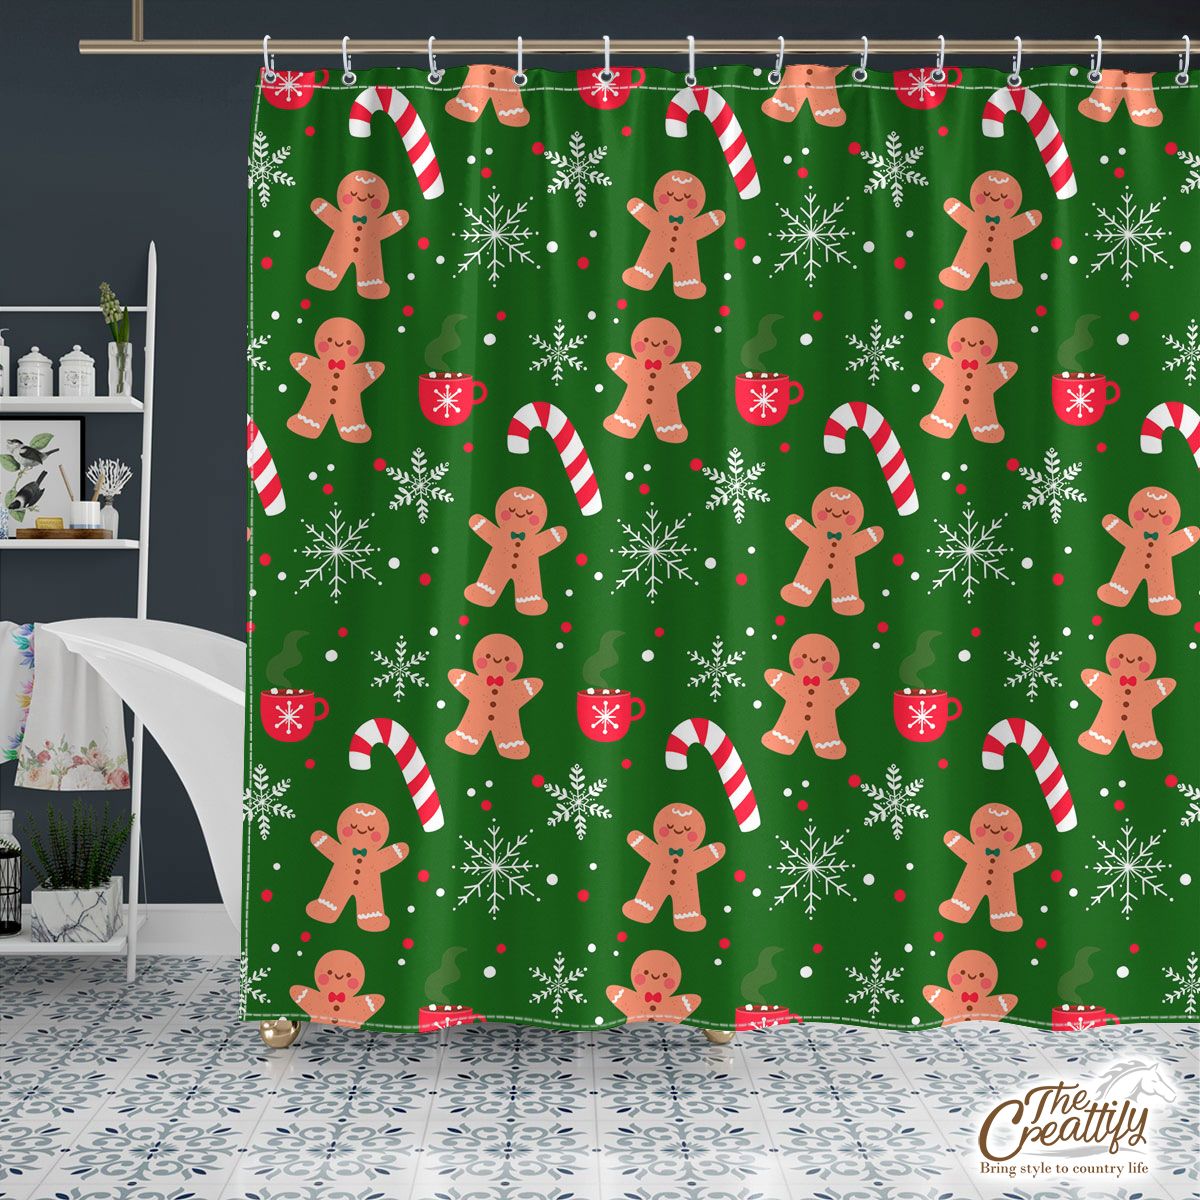 Red Green And White Gingerbread Man, Candy Cane With Snowflake Shower Curtain